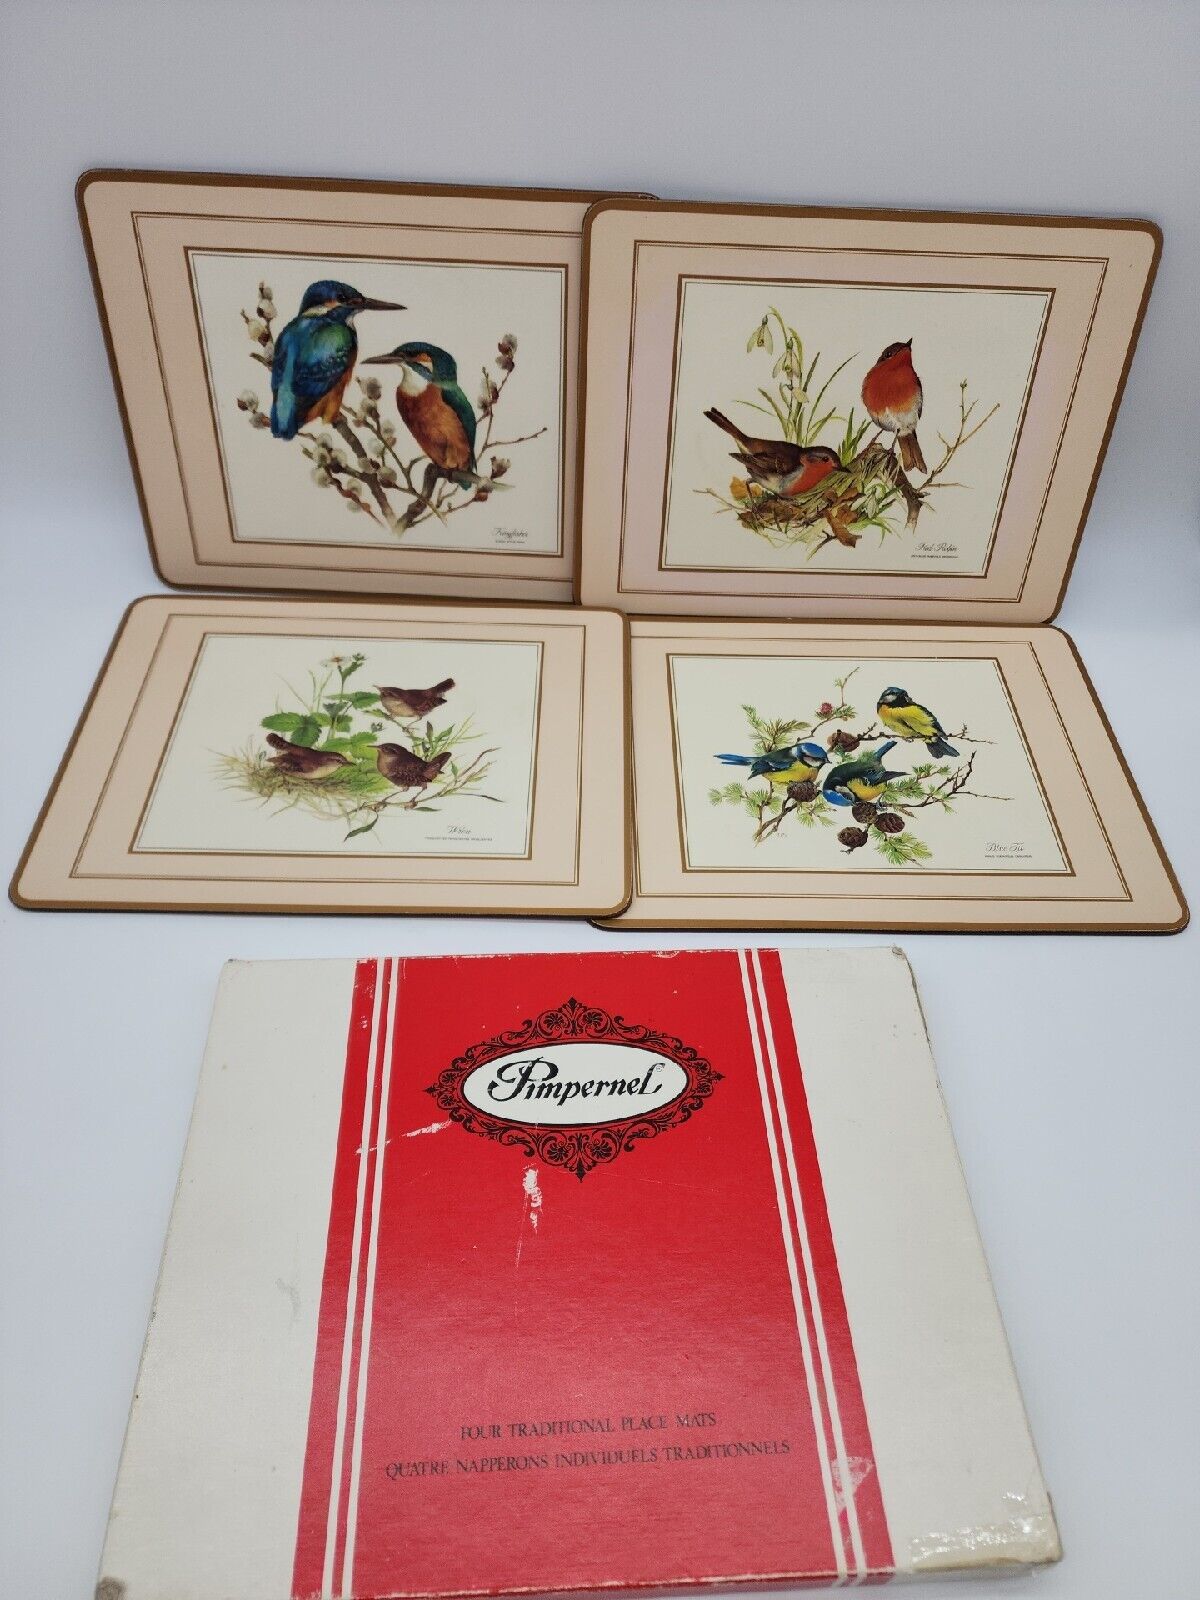 4 Vintage Pimpernel Place Mats cork backed W/Box Made in England European Birds 